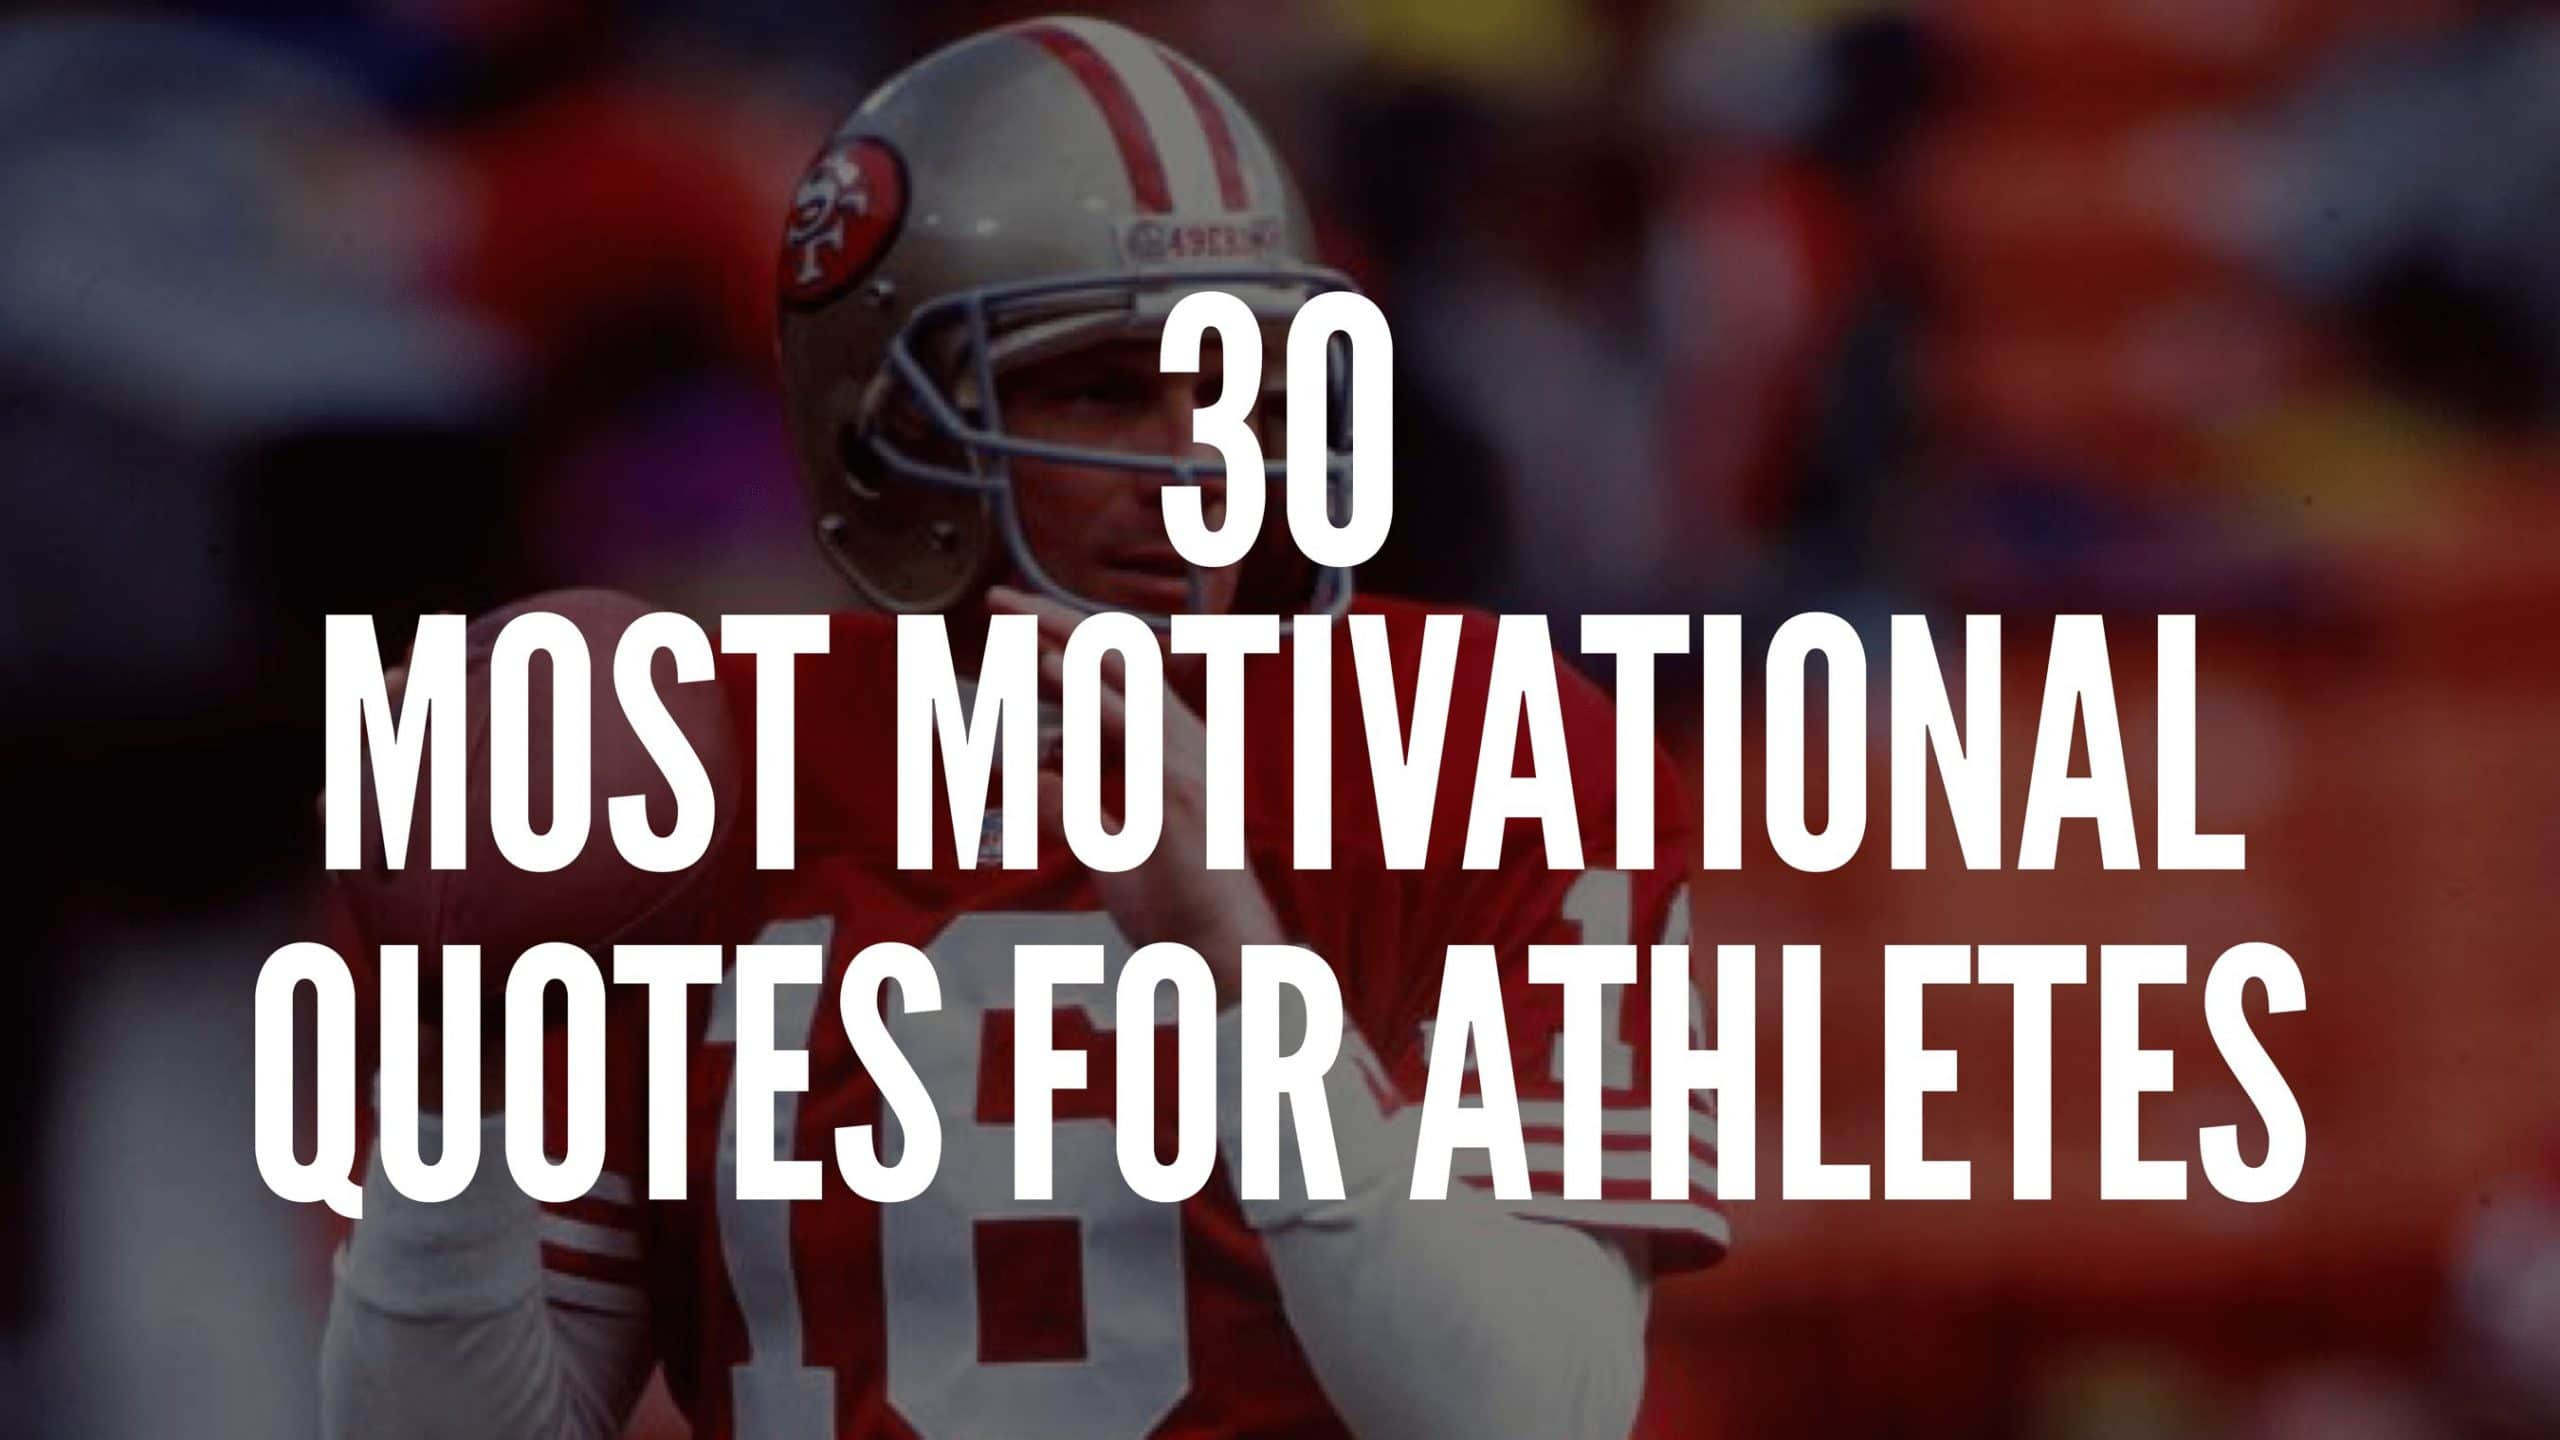 Motivational Quotes For Athletes
 30 Most Motivational Quotes For Athletes